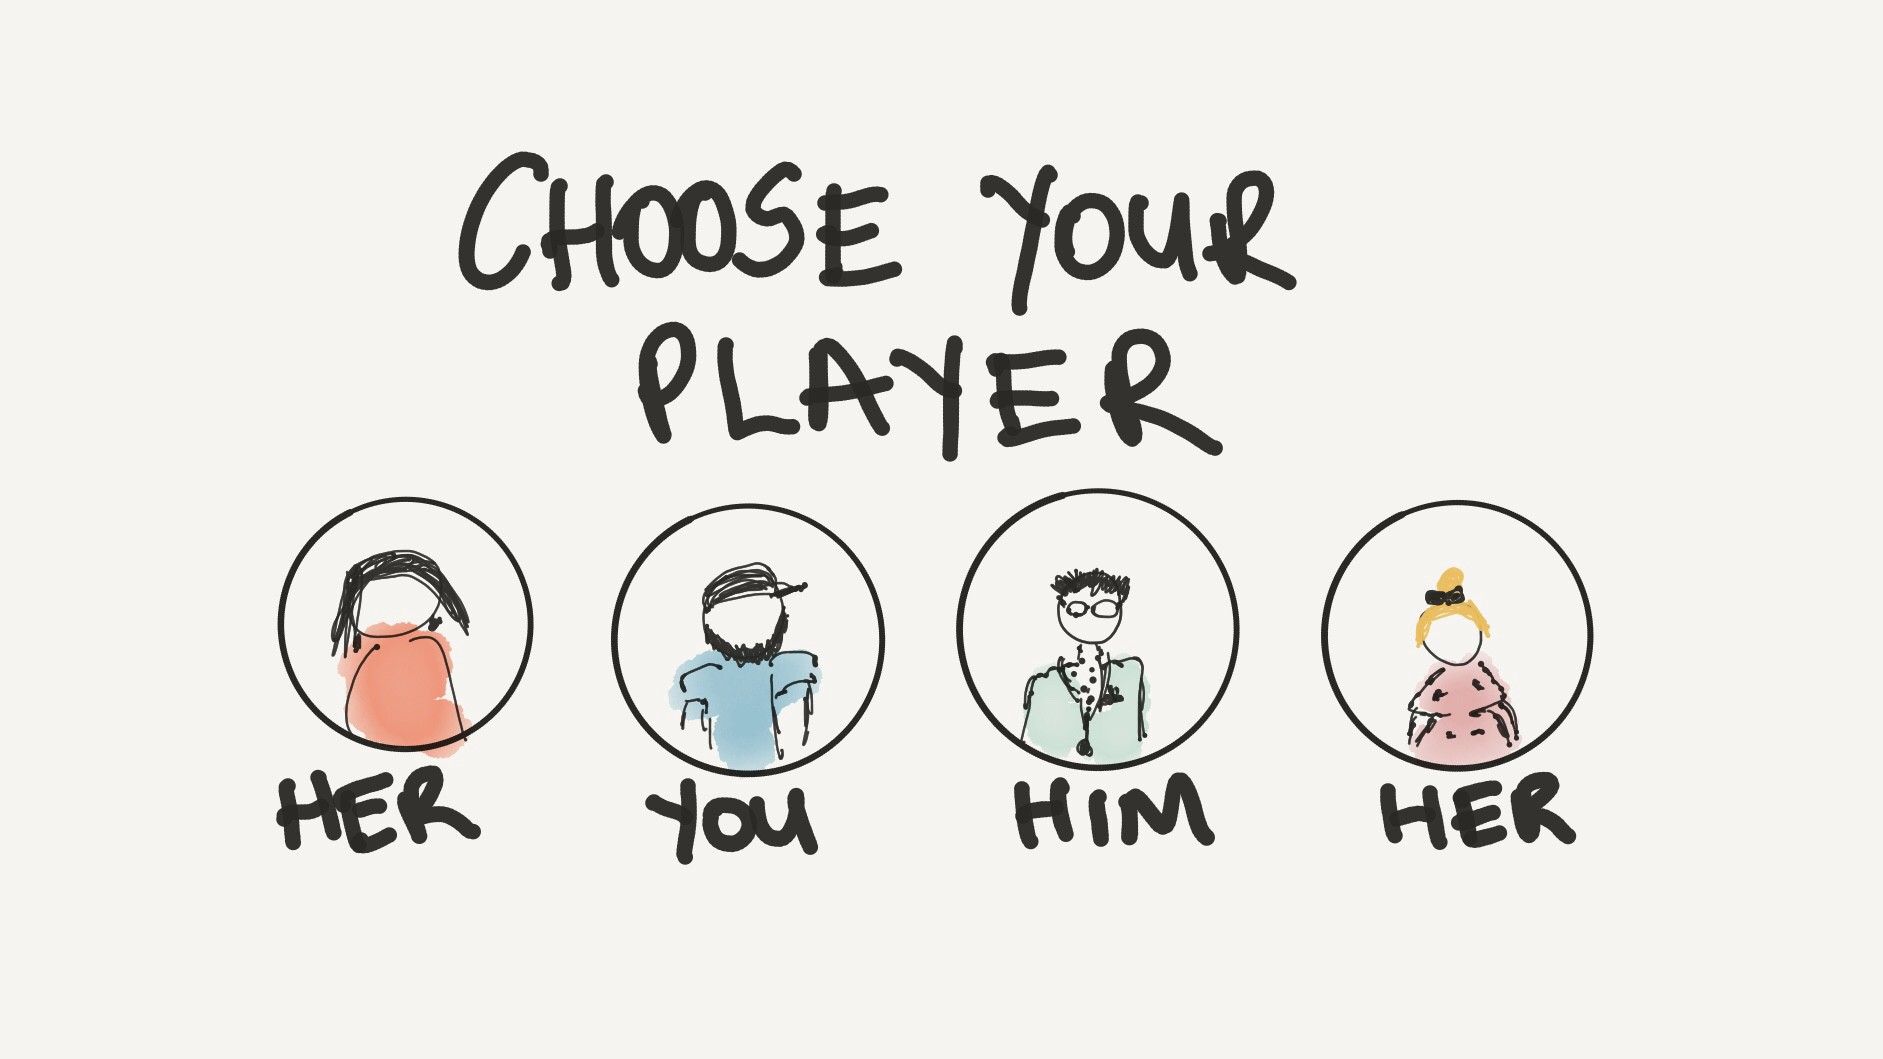 Choose Your Own Character, Not Someone Else’s